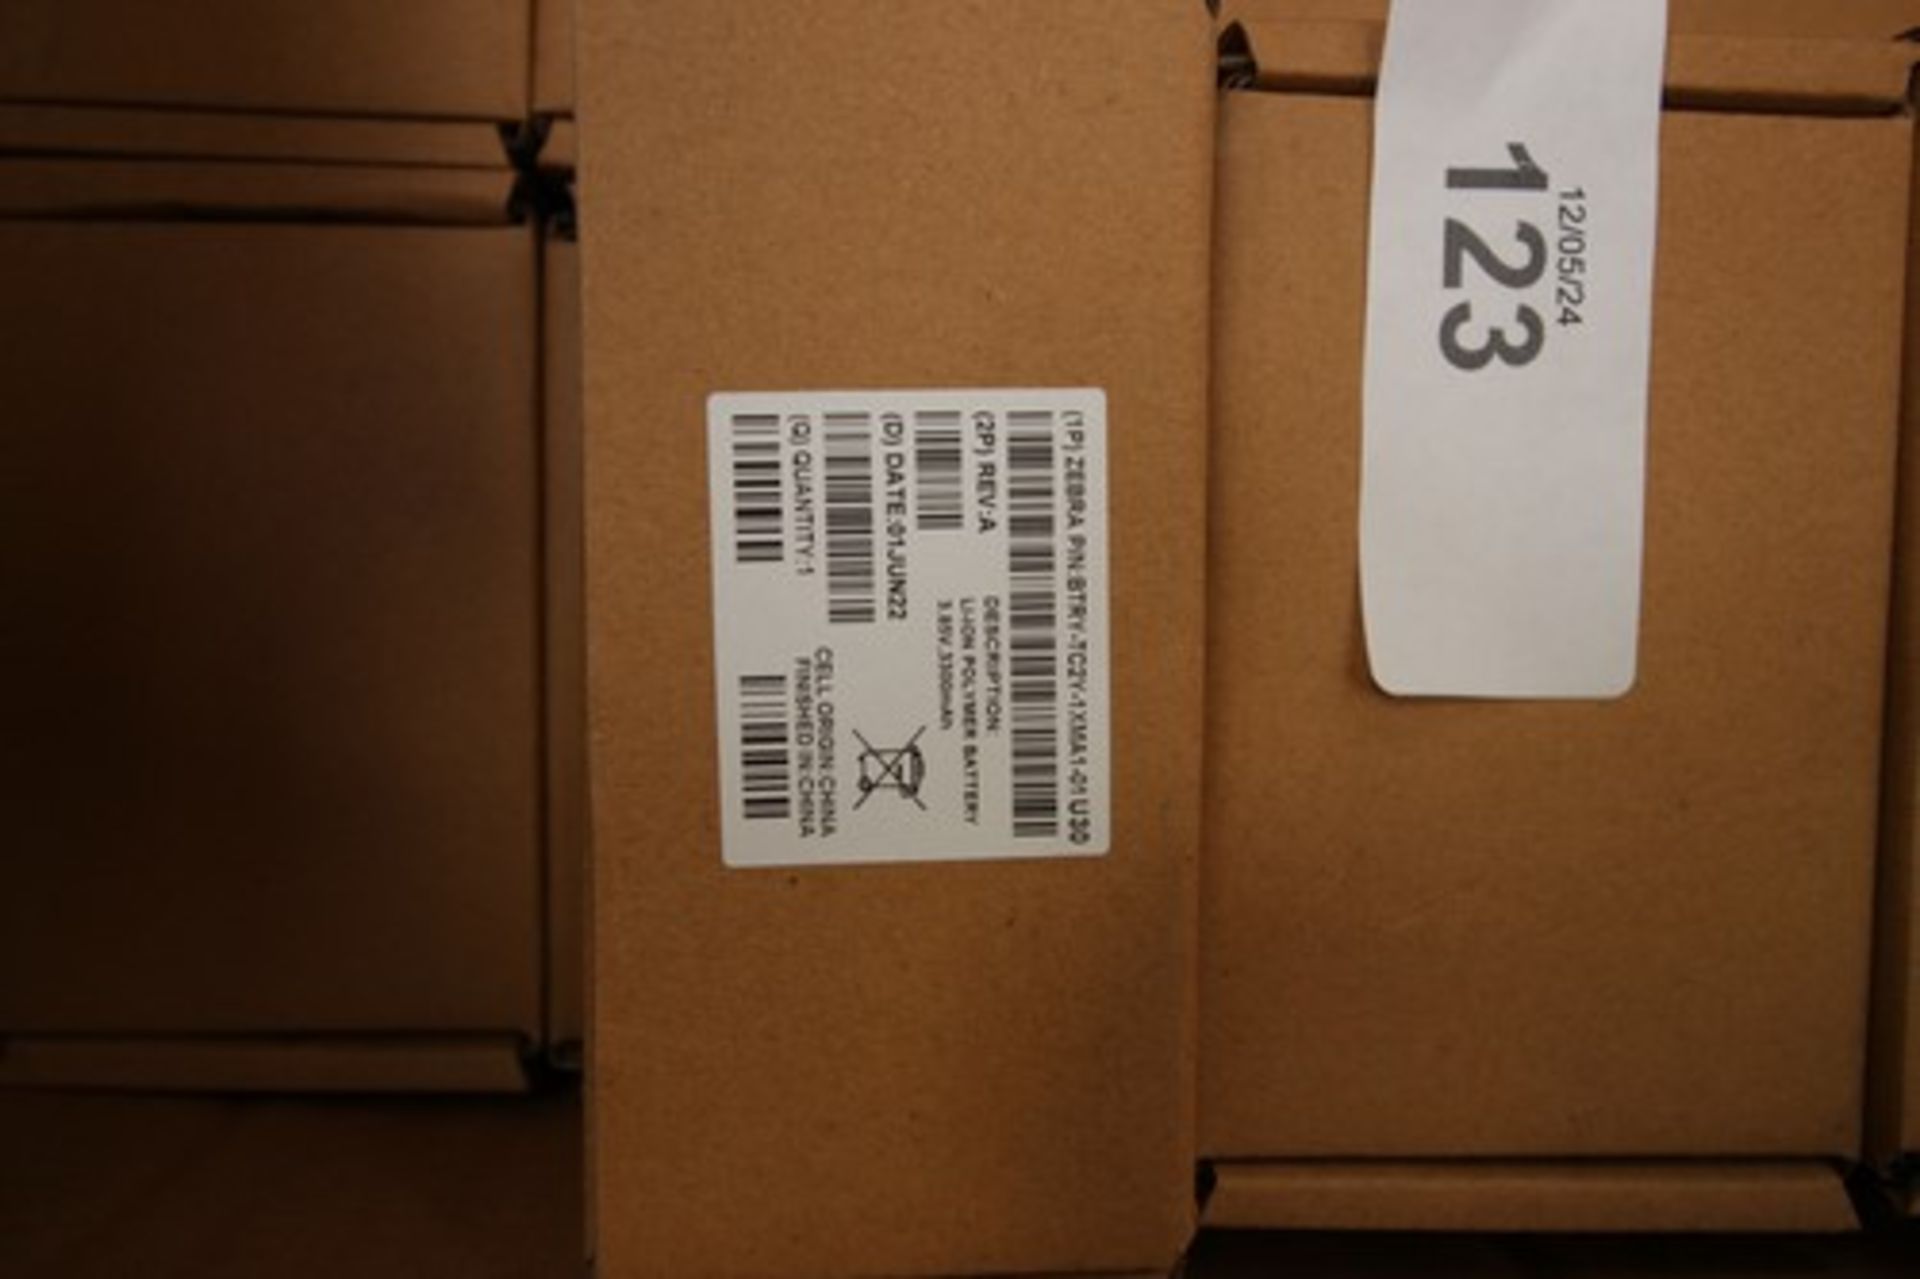 24 x Zebra scanner batteries, model No: BTRY-TC2Y-1XMA1-01, manufactured: 01/June/22 - new in box ( - Image 2 of 2